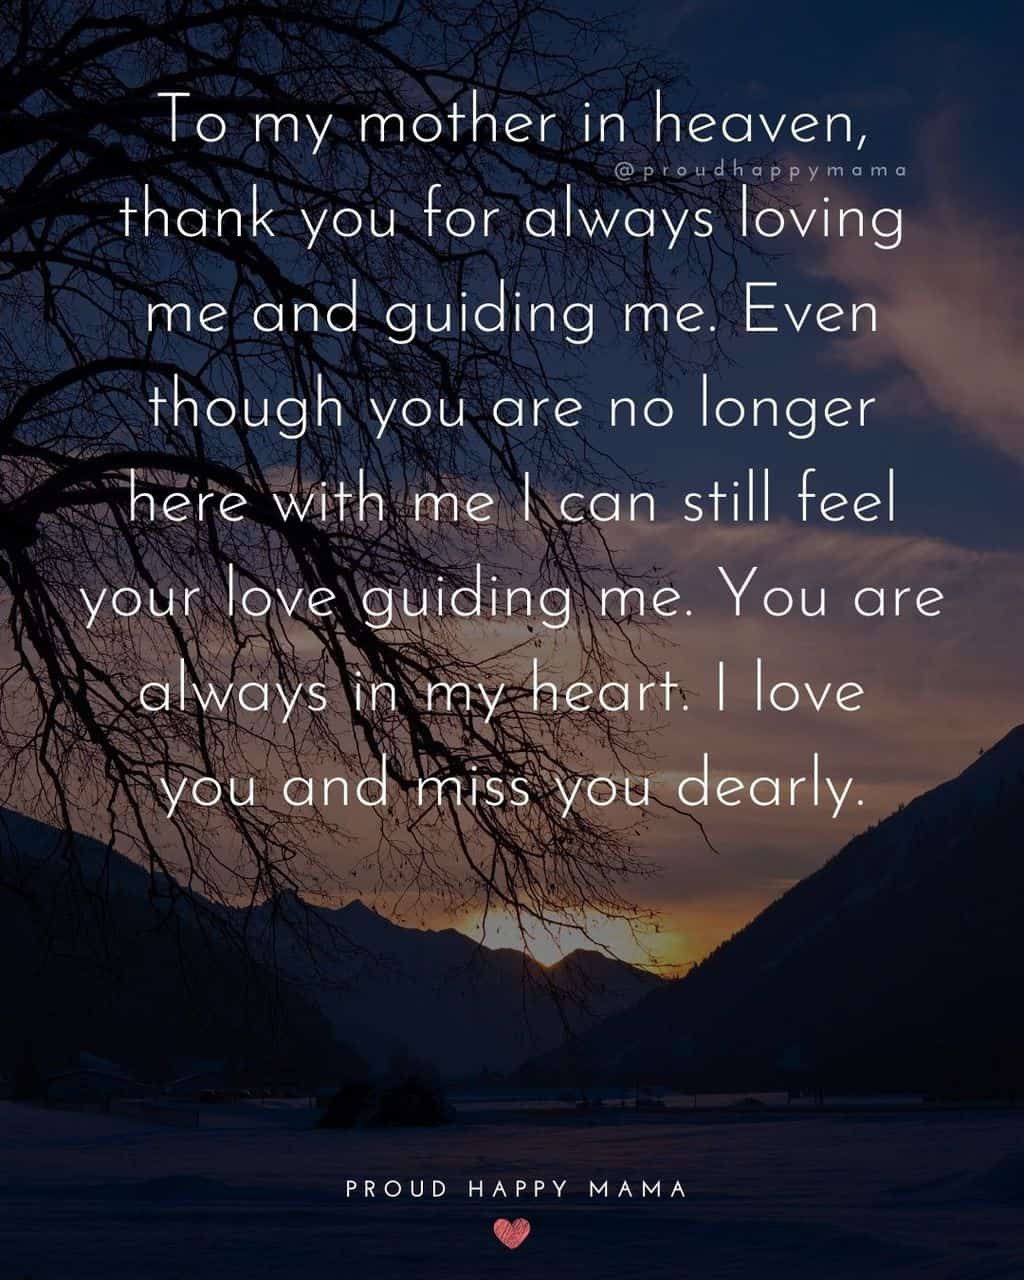 Sun setting over snow covered mountains with text overlay, ‘To my mother in heaven, thank you for always loving me and guiding me. Even though you are no longer here with me I can still feel your love guiding me. You are always in my heart. I love you and miss you dearly.’